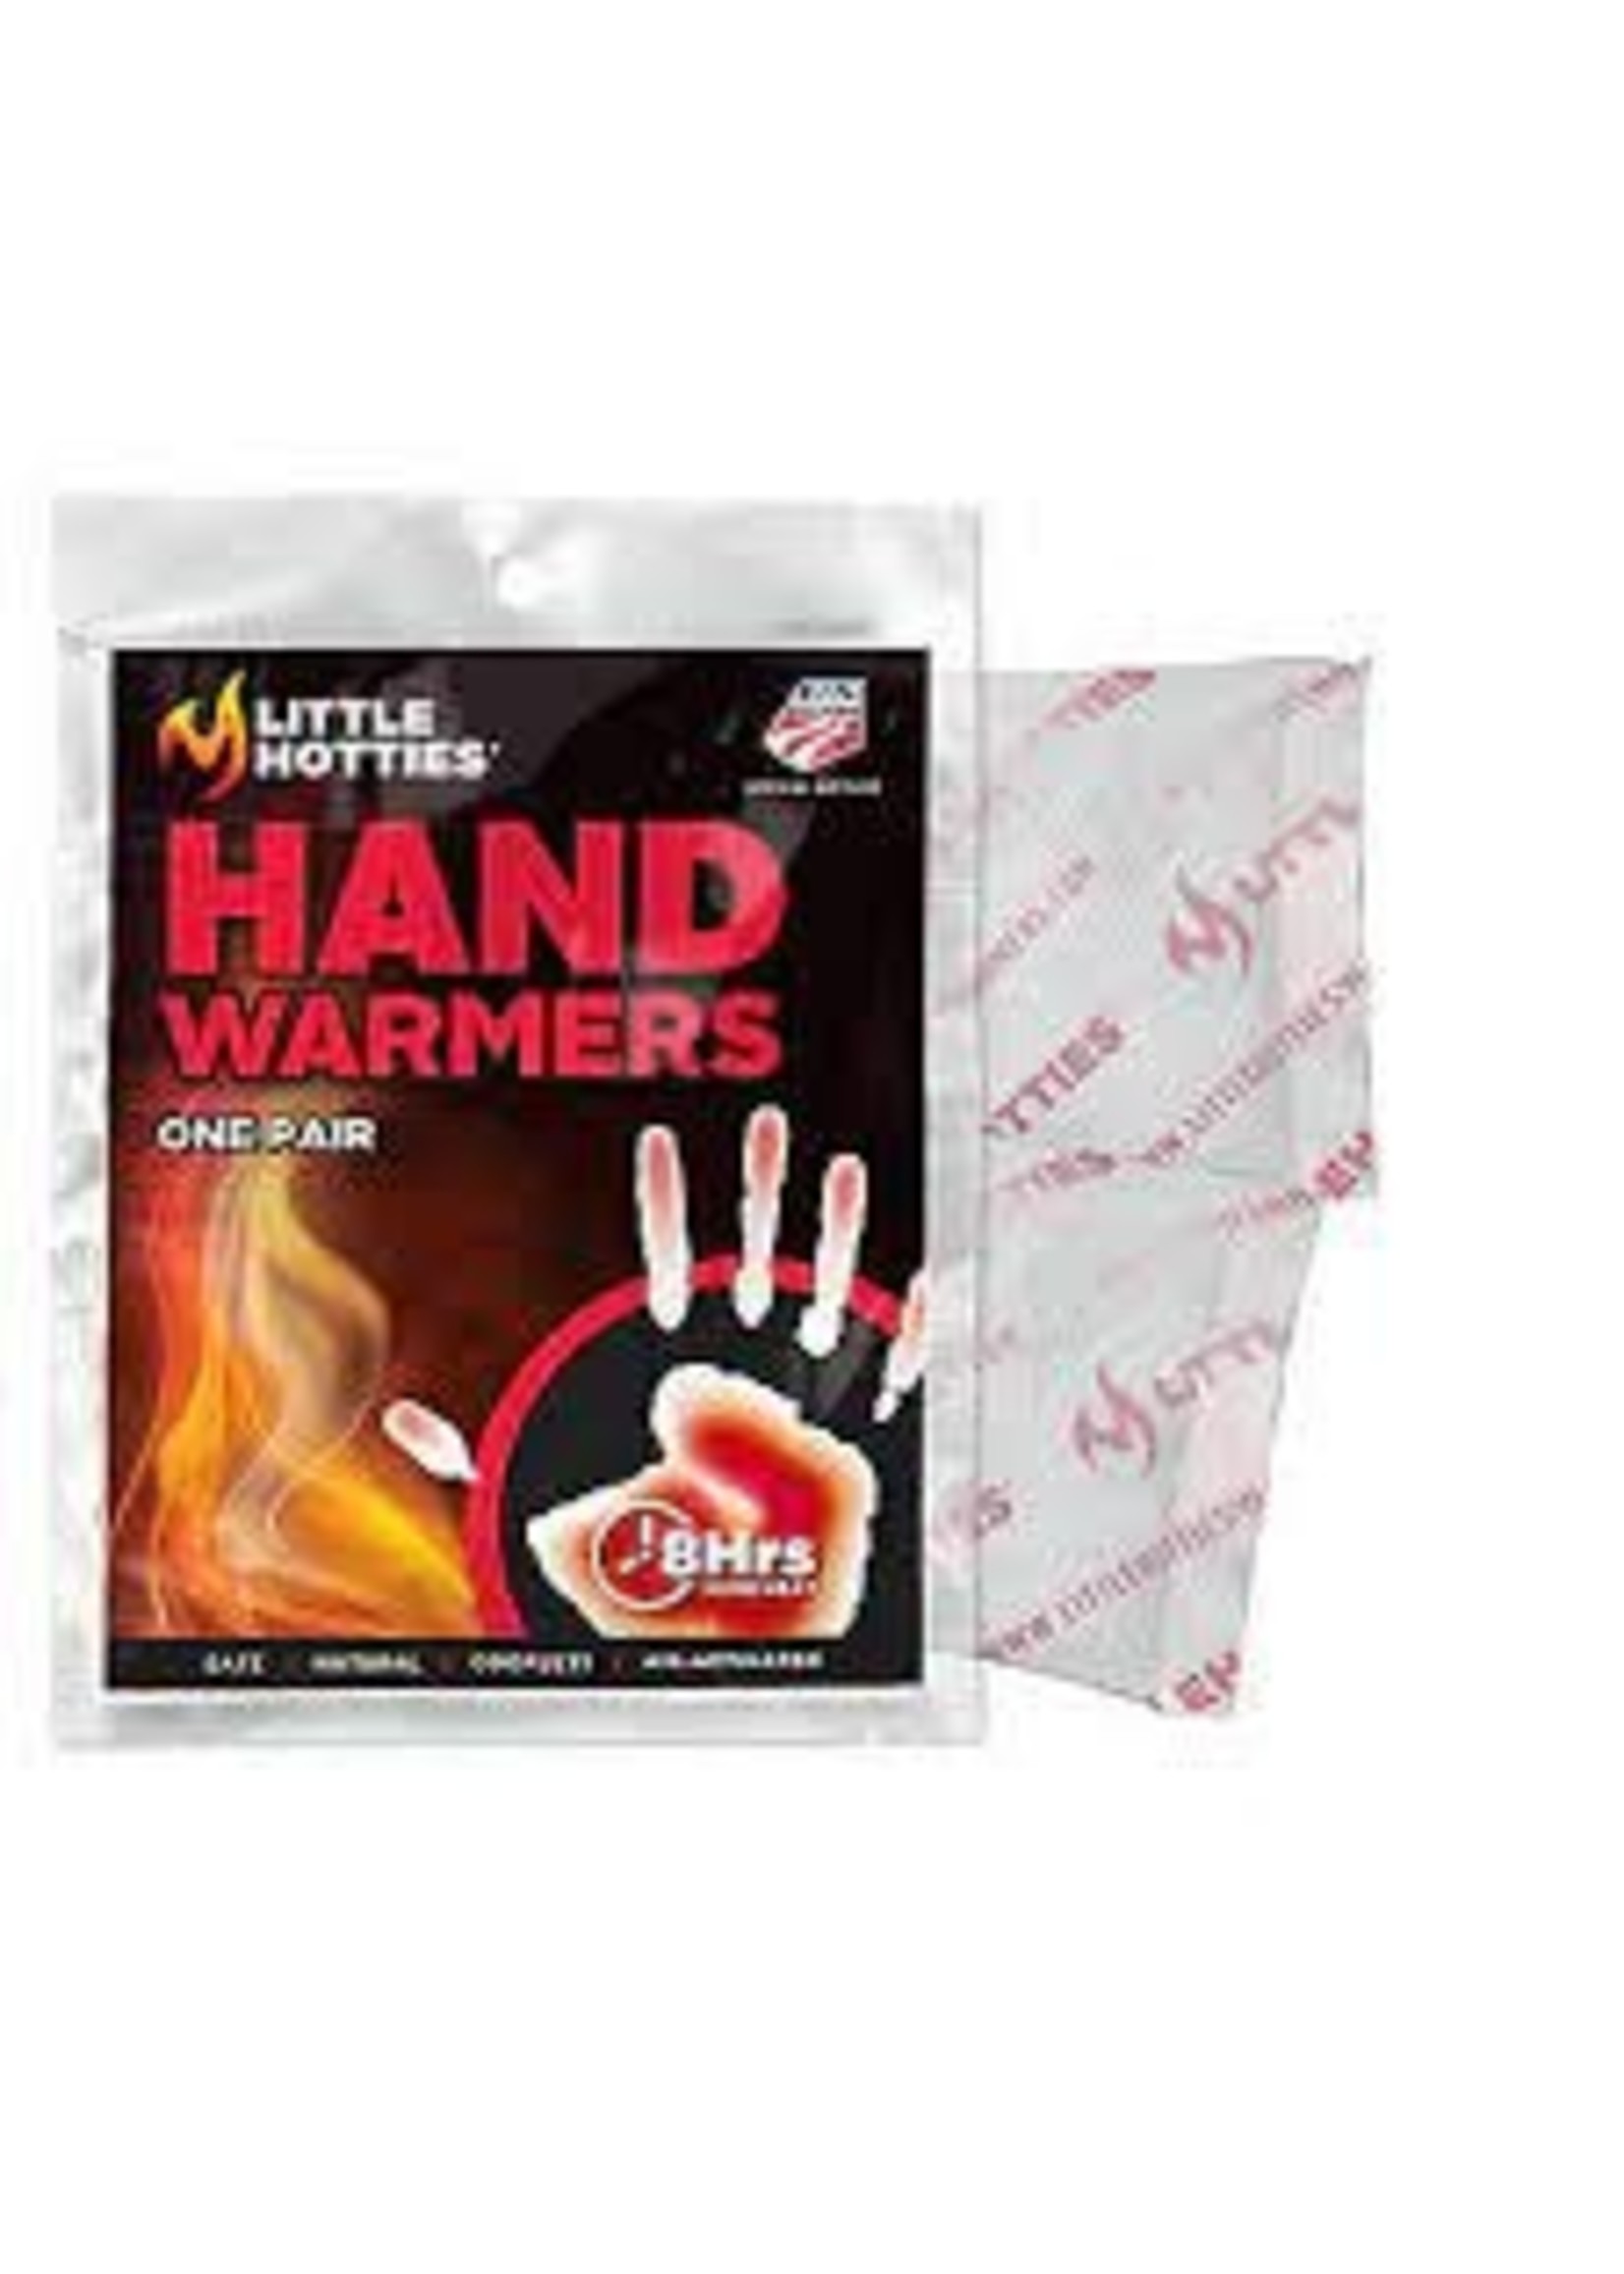 LITTLE HOTTIES HAND WARMERS 8 HRS ONE PAIR